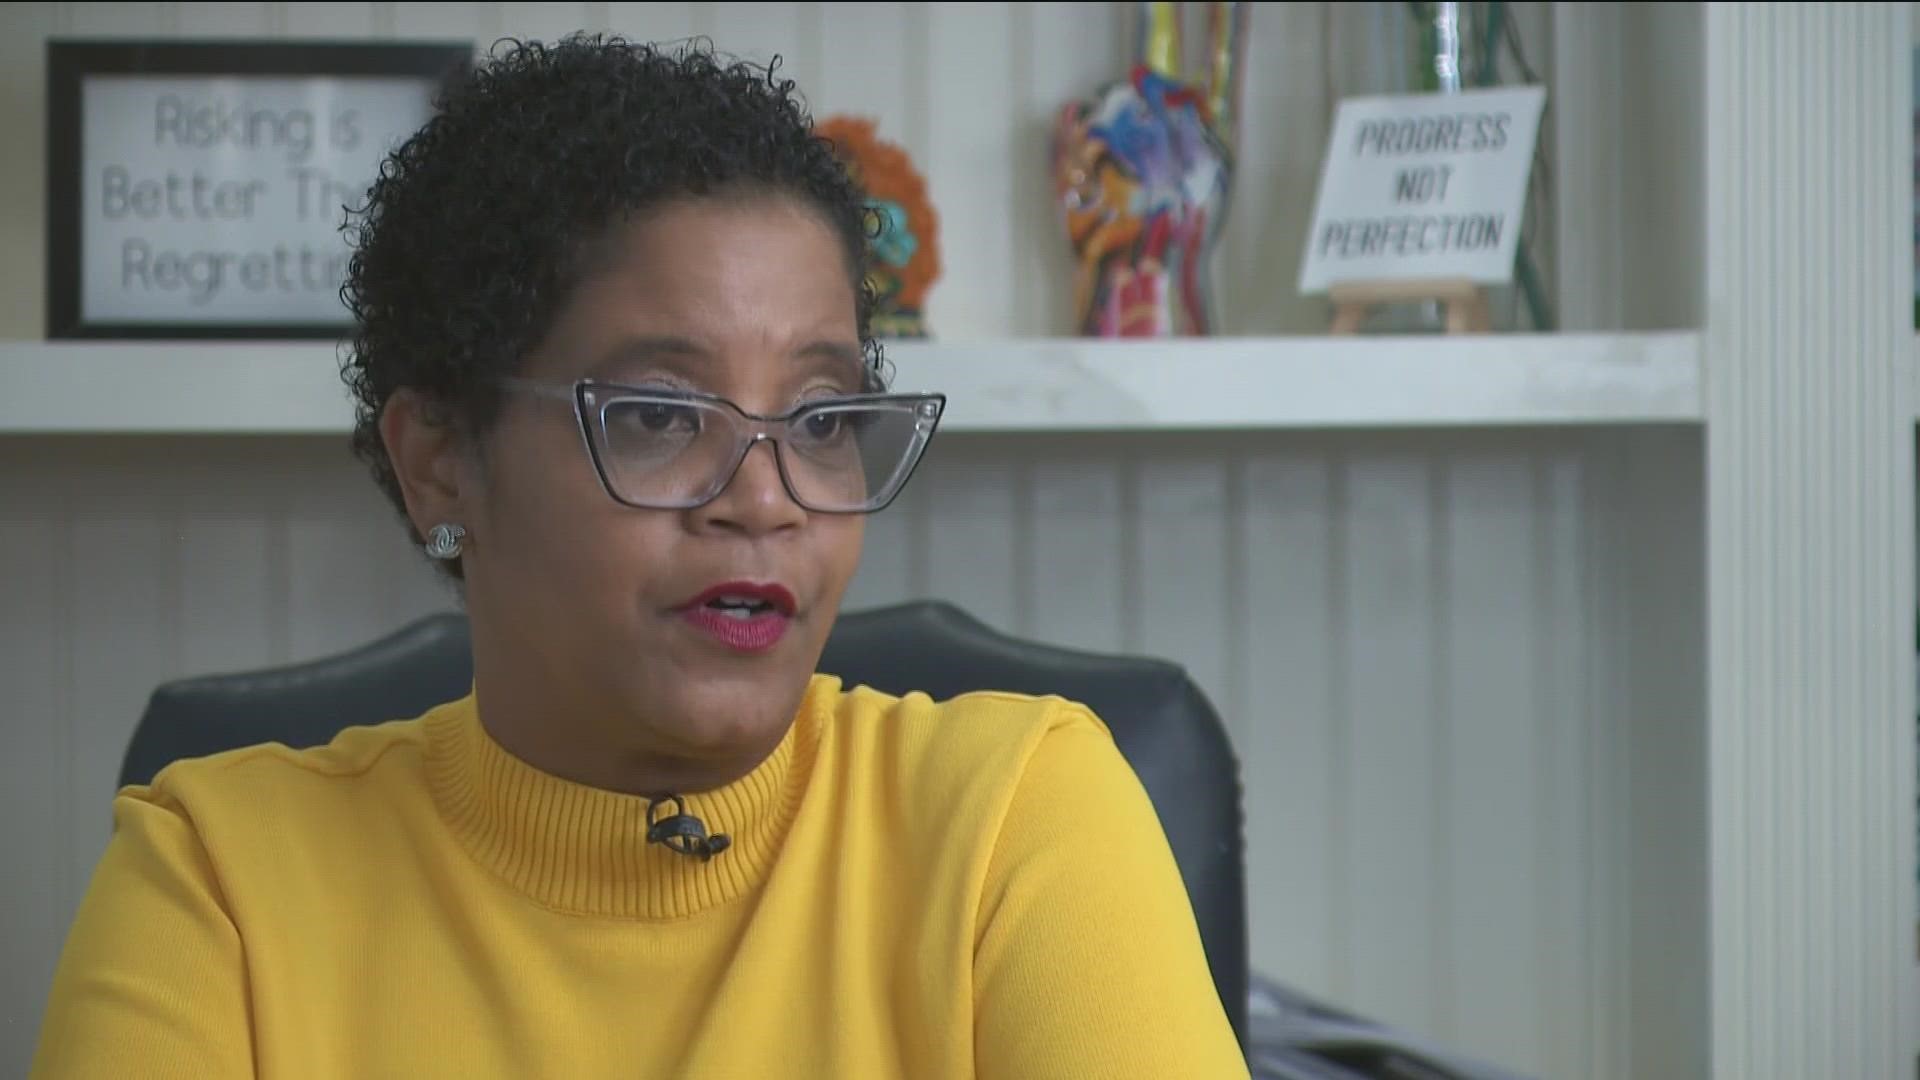 A new million-dollar fund will help local Black-led nonprofits bring equity to the community. Daranesha Herron has the story.